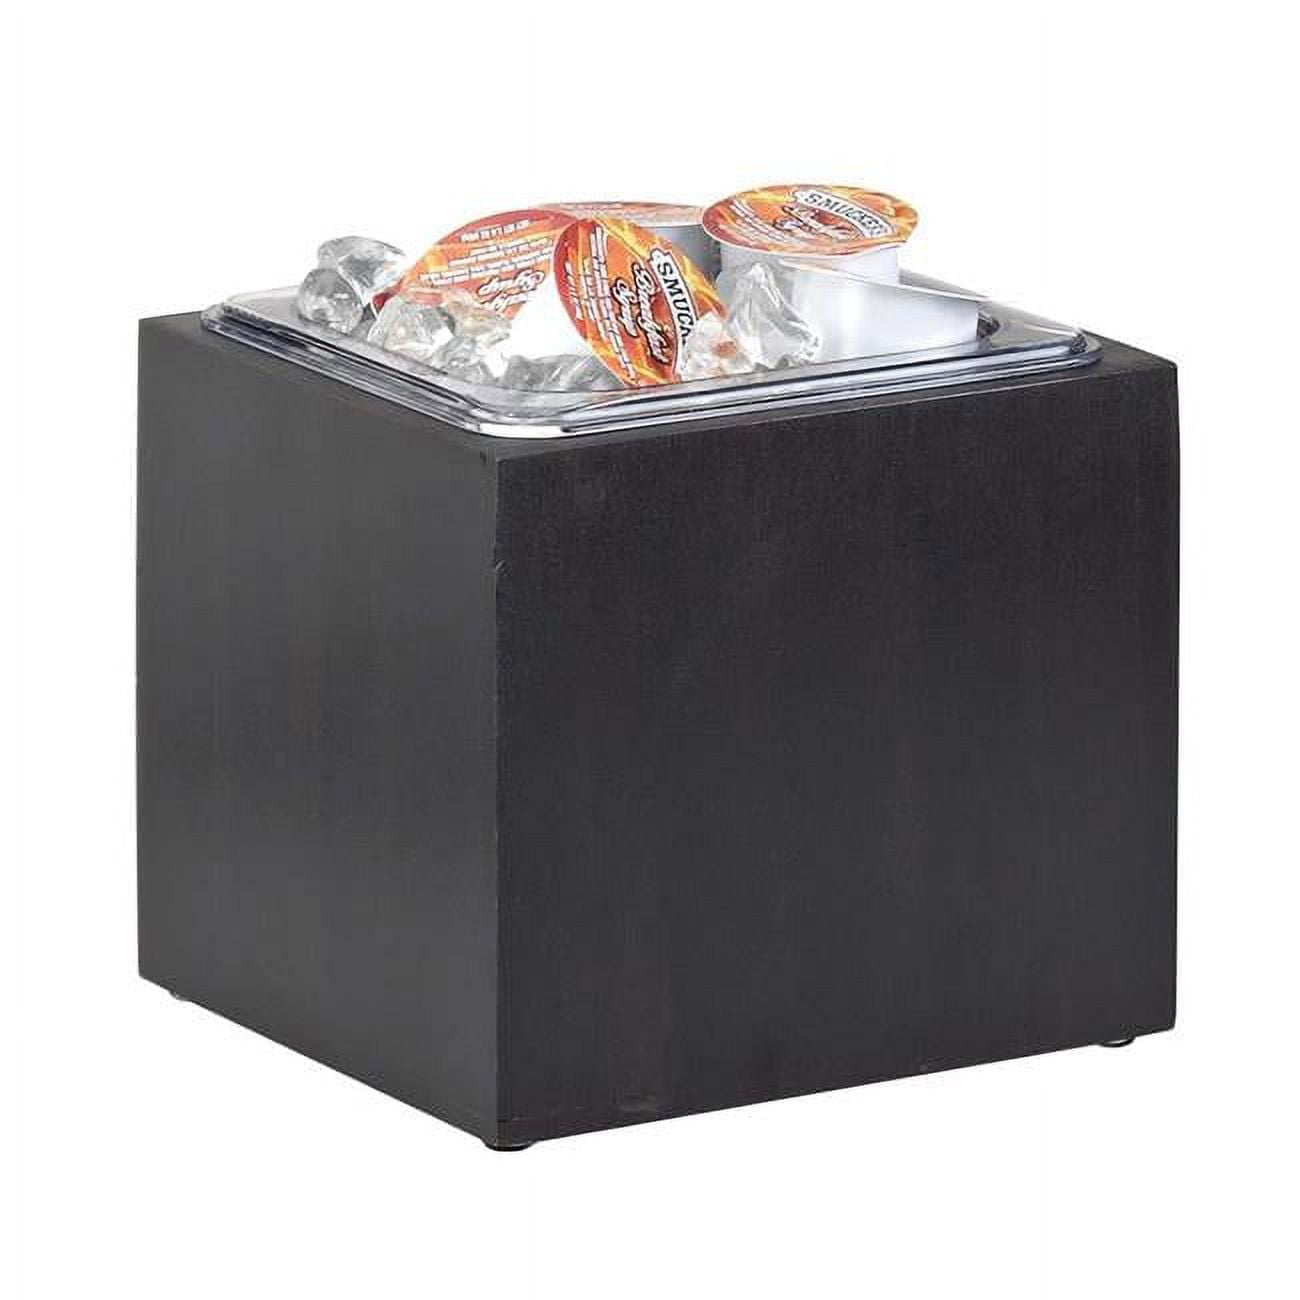 Picture of Cal Mil 475-6-96 Midnight Bamboo Ice Housing with Clear Pan - 6 x 7 x 6.5 in.